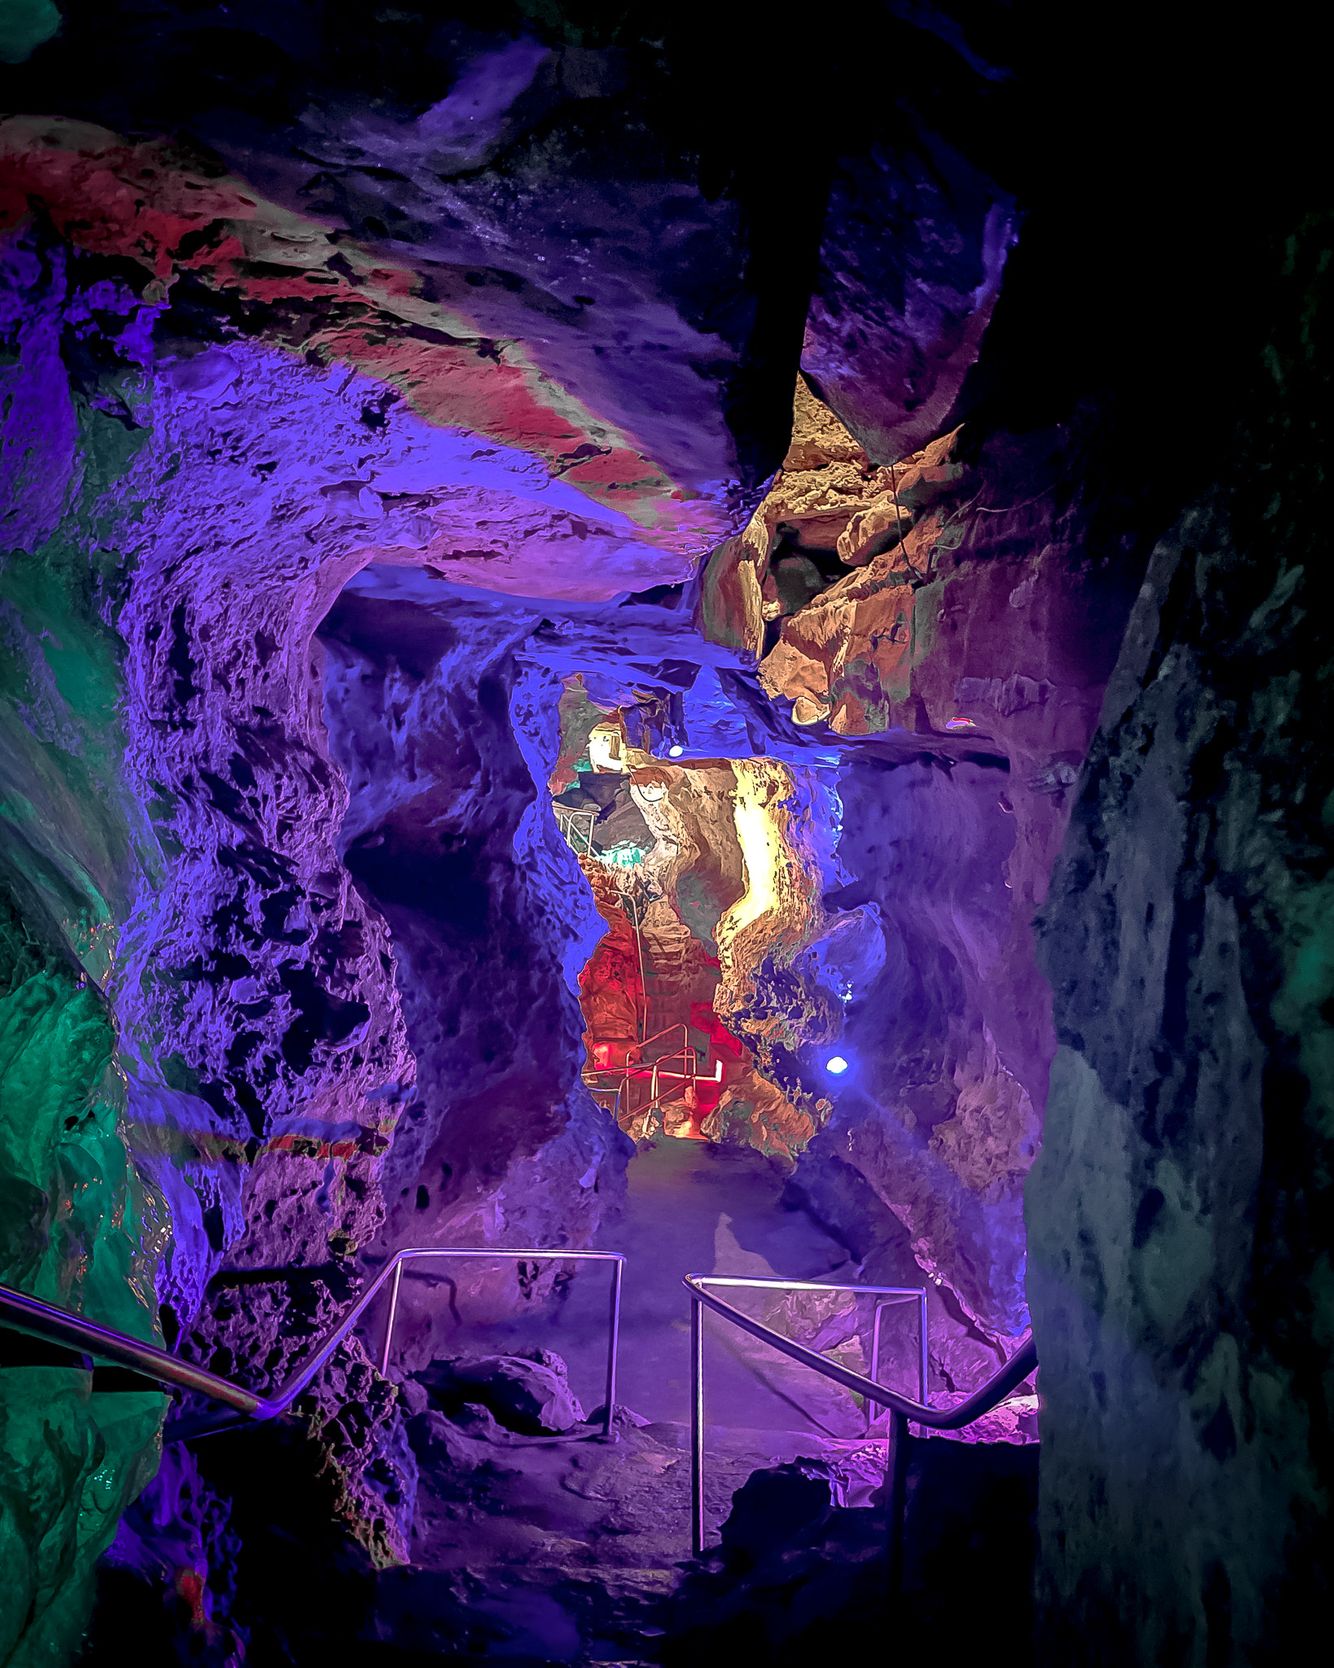 Wonder World Cave: First Show Cave in Texas. Enter a Colorful Oasis of Mystery.